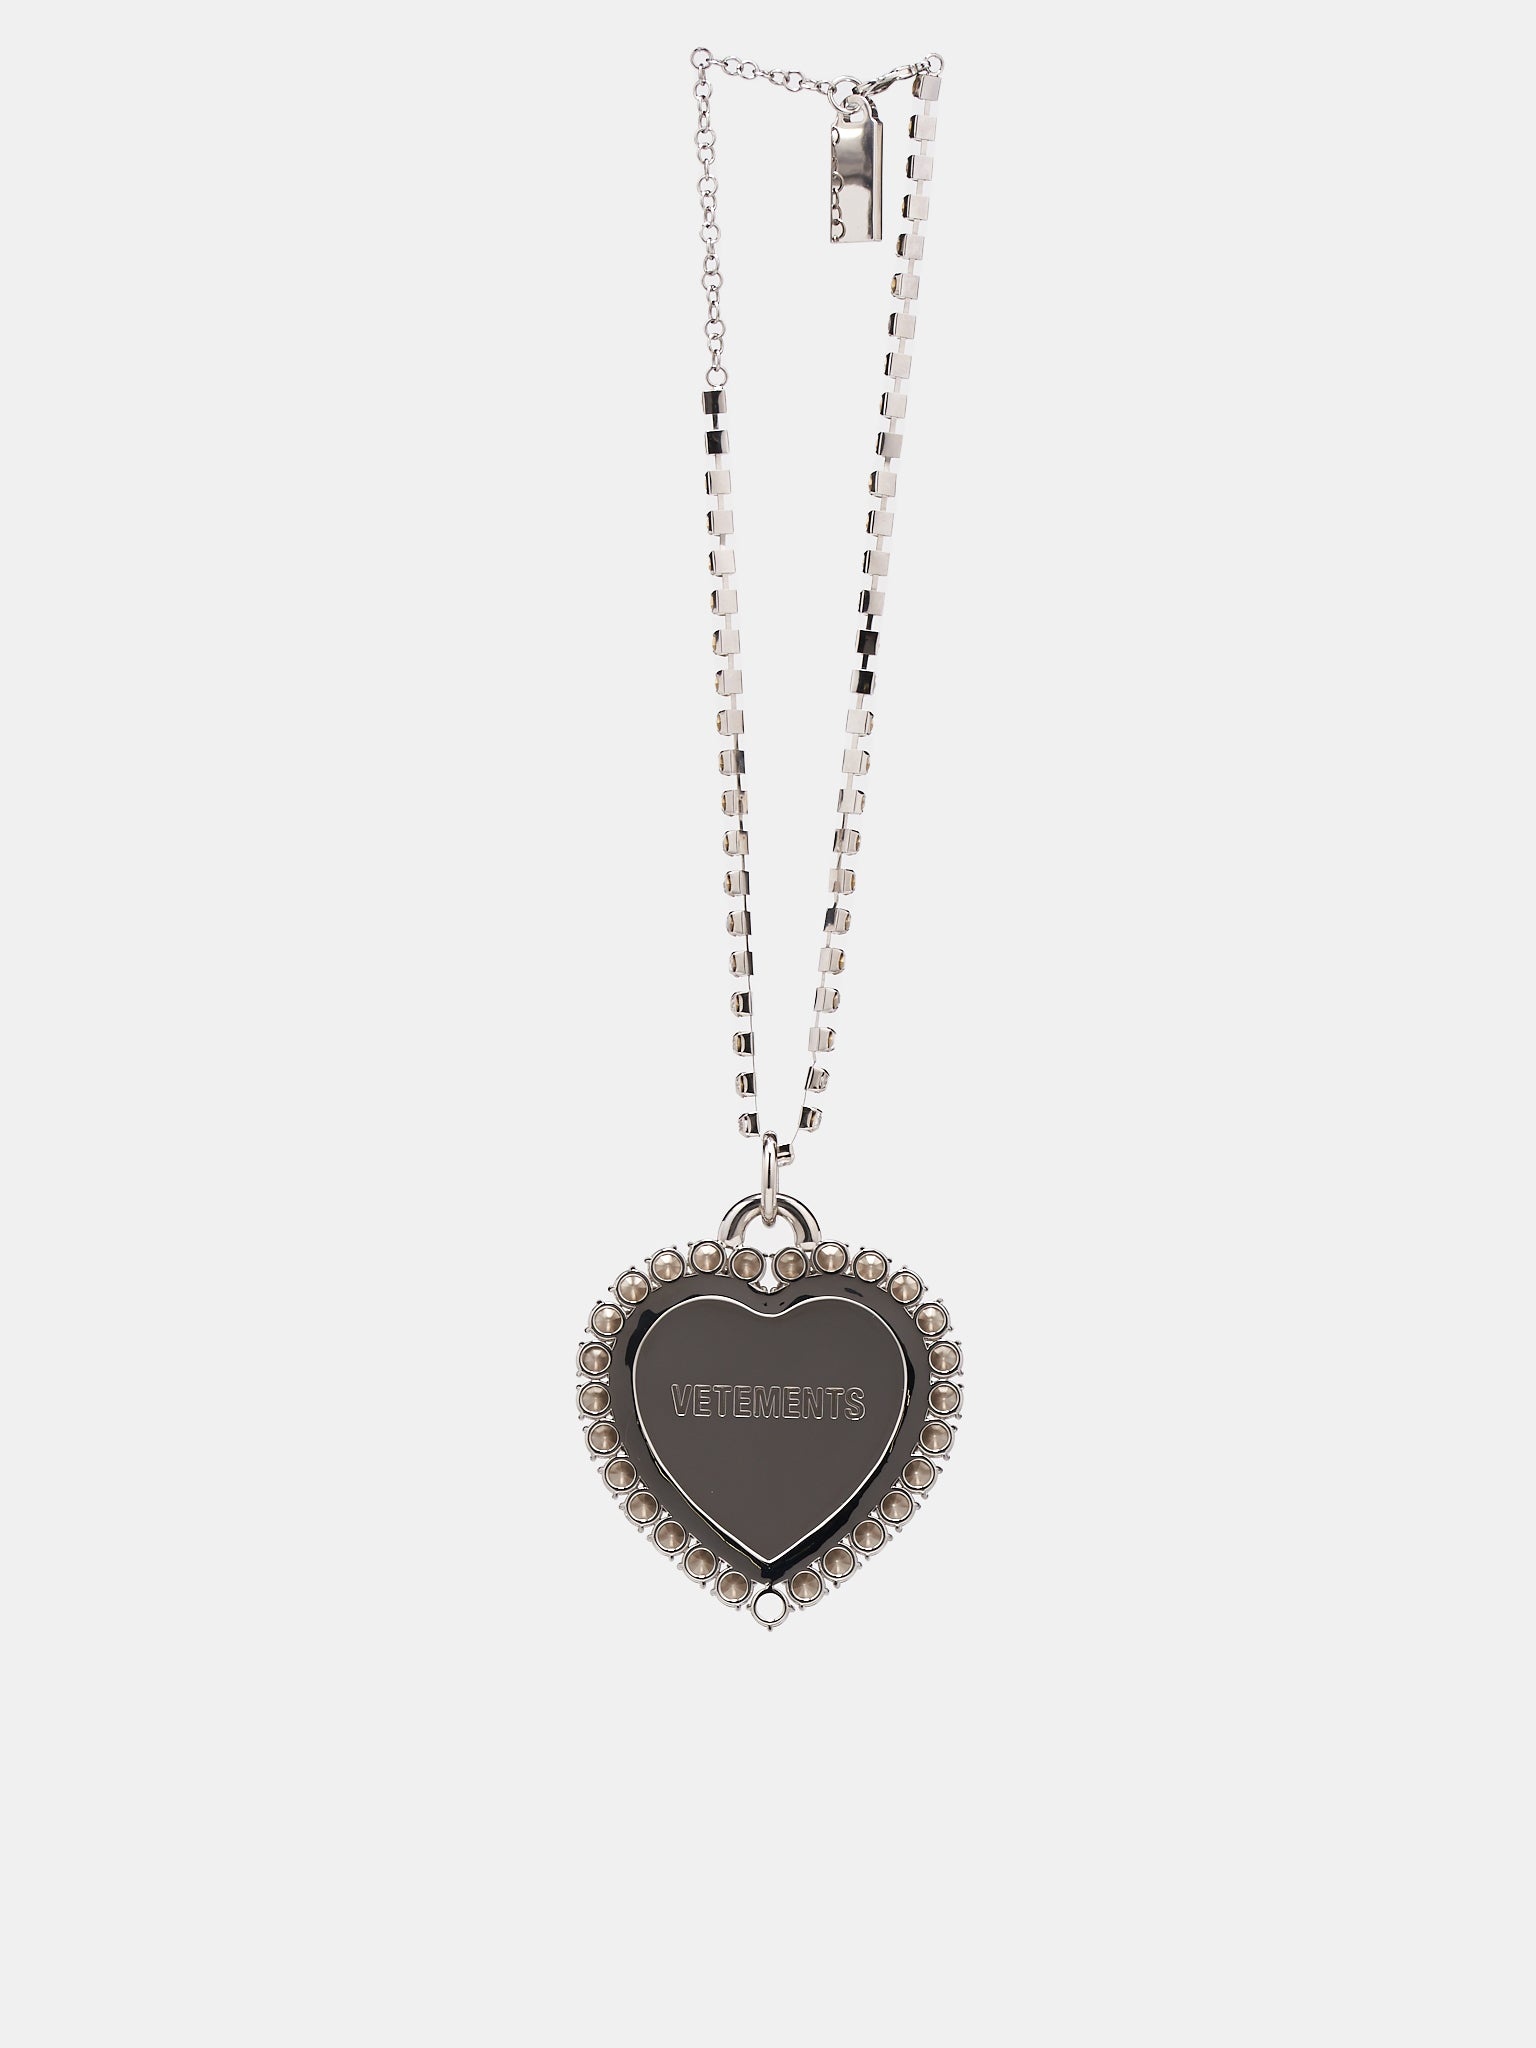 Giant Crystal Heart Necklace - 2